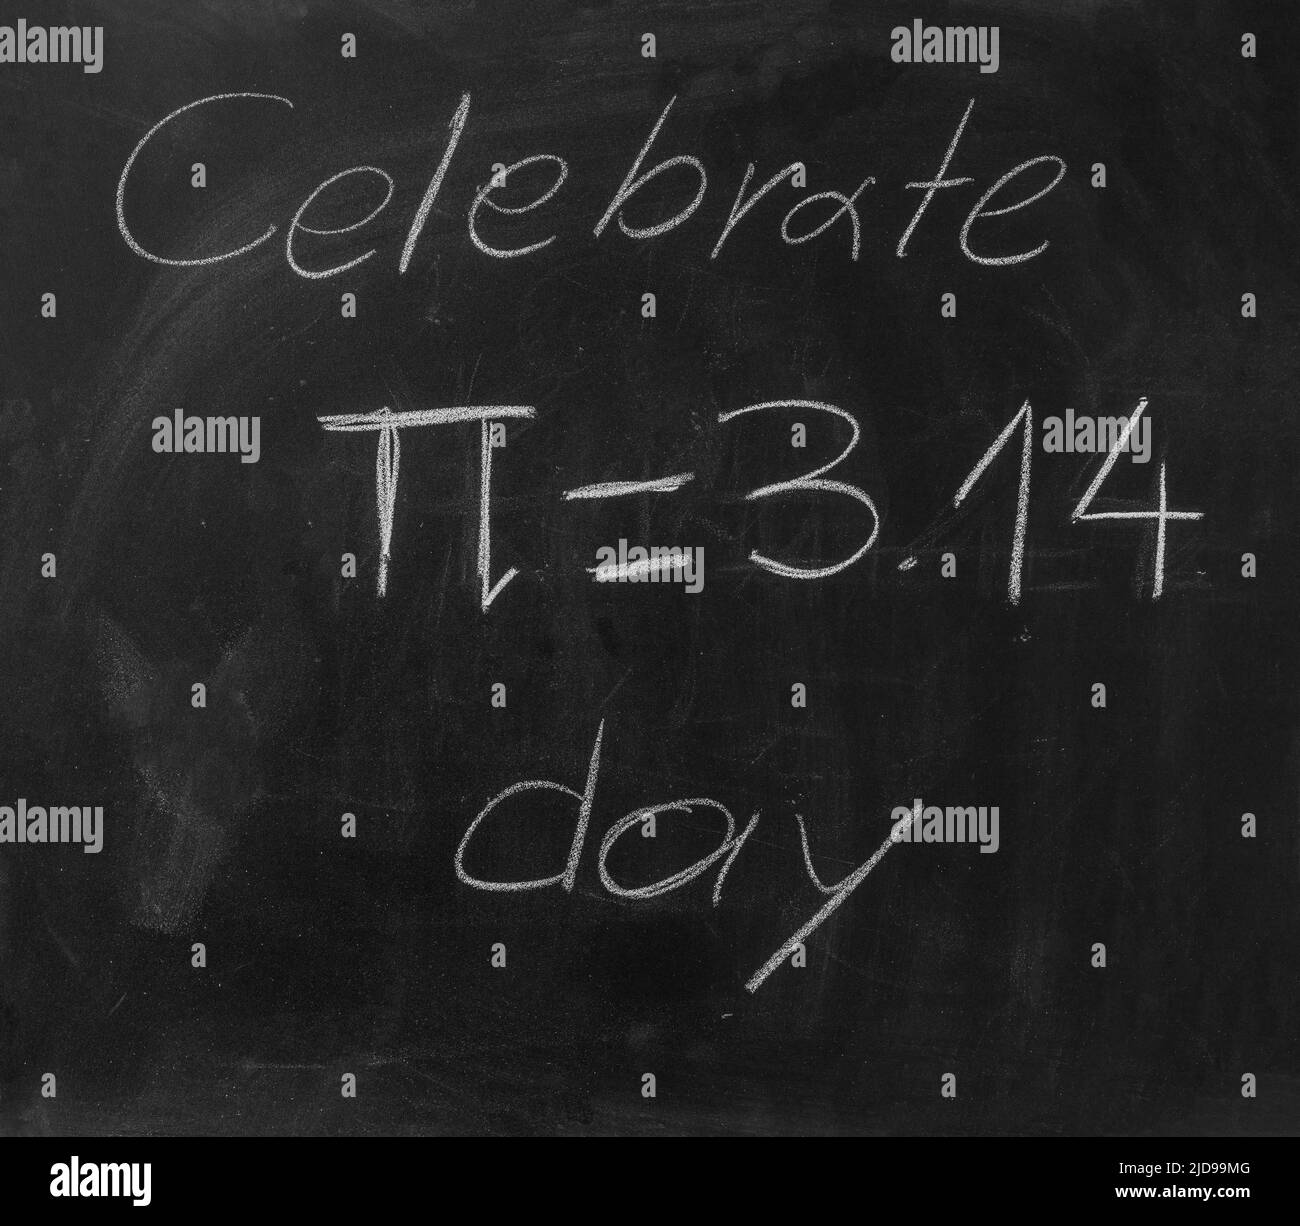 Pi number day, Celebrate Pi text chalk drawing on a school black board. Greek letter symbol and mathematical constant handwriting Stock Photo